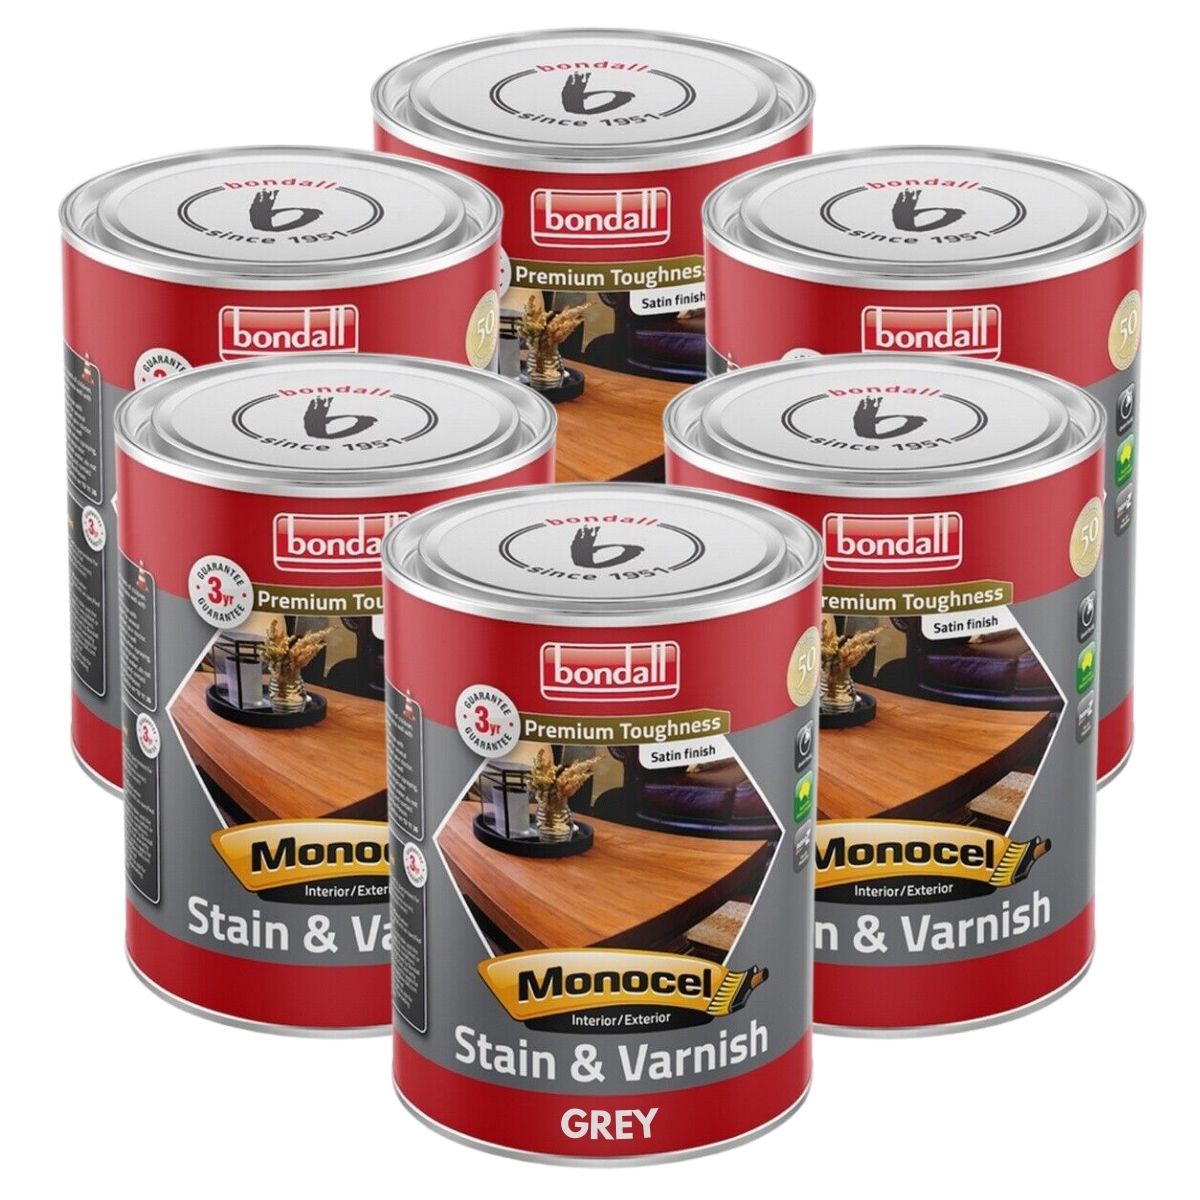 Bondall Monocel Stain & Varnish | Interior & Exterior | 1 litre Grey - 6 Tins - South East Clearance Centre